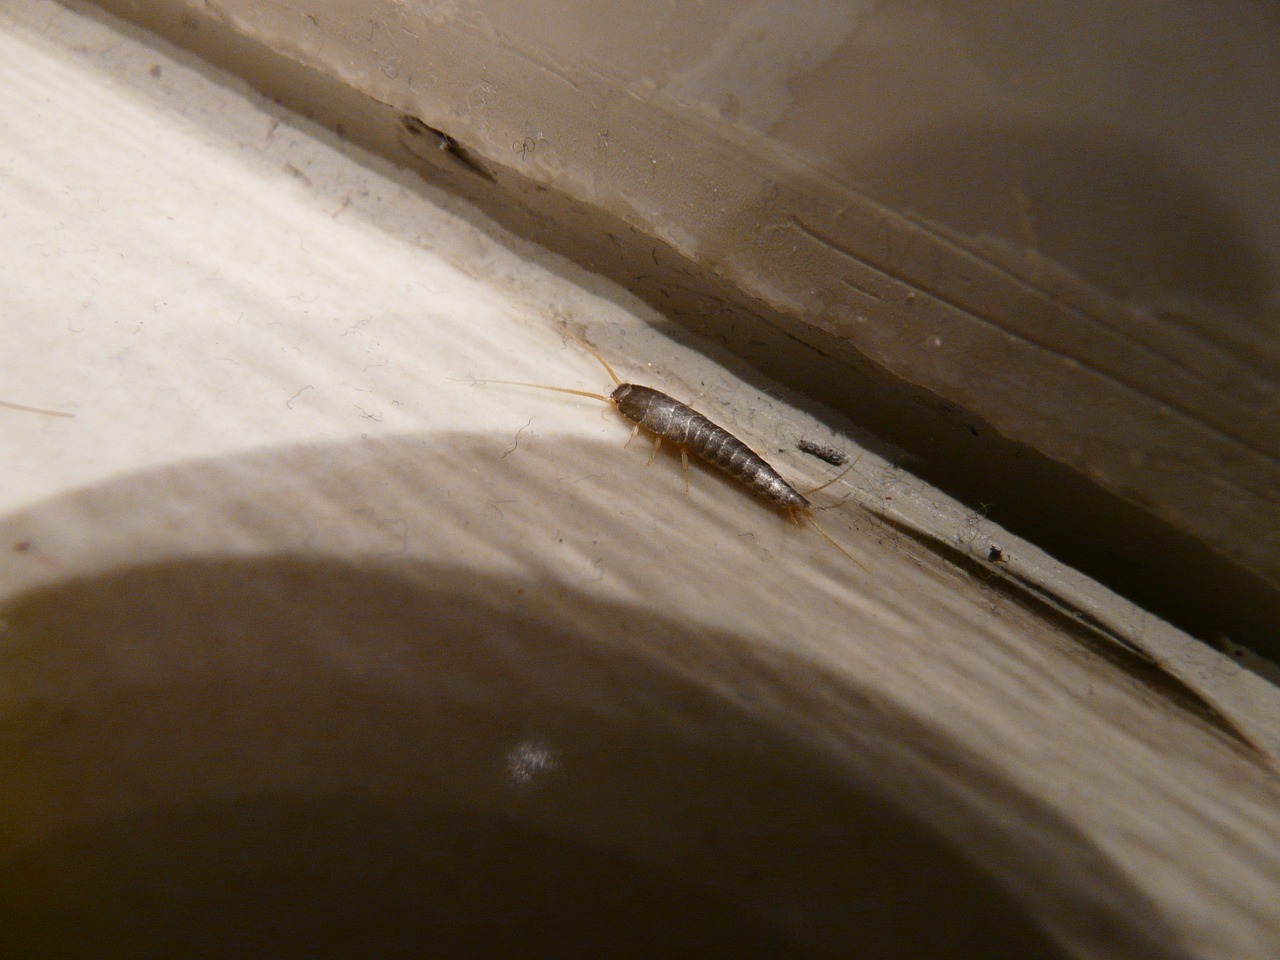 Signs of a Silverfish Infestation: How to Identify and Deal with Them